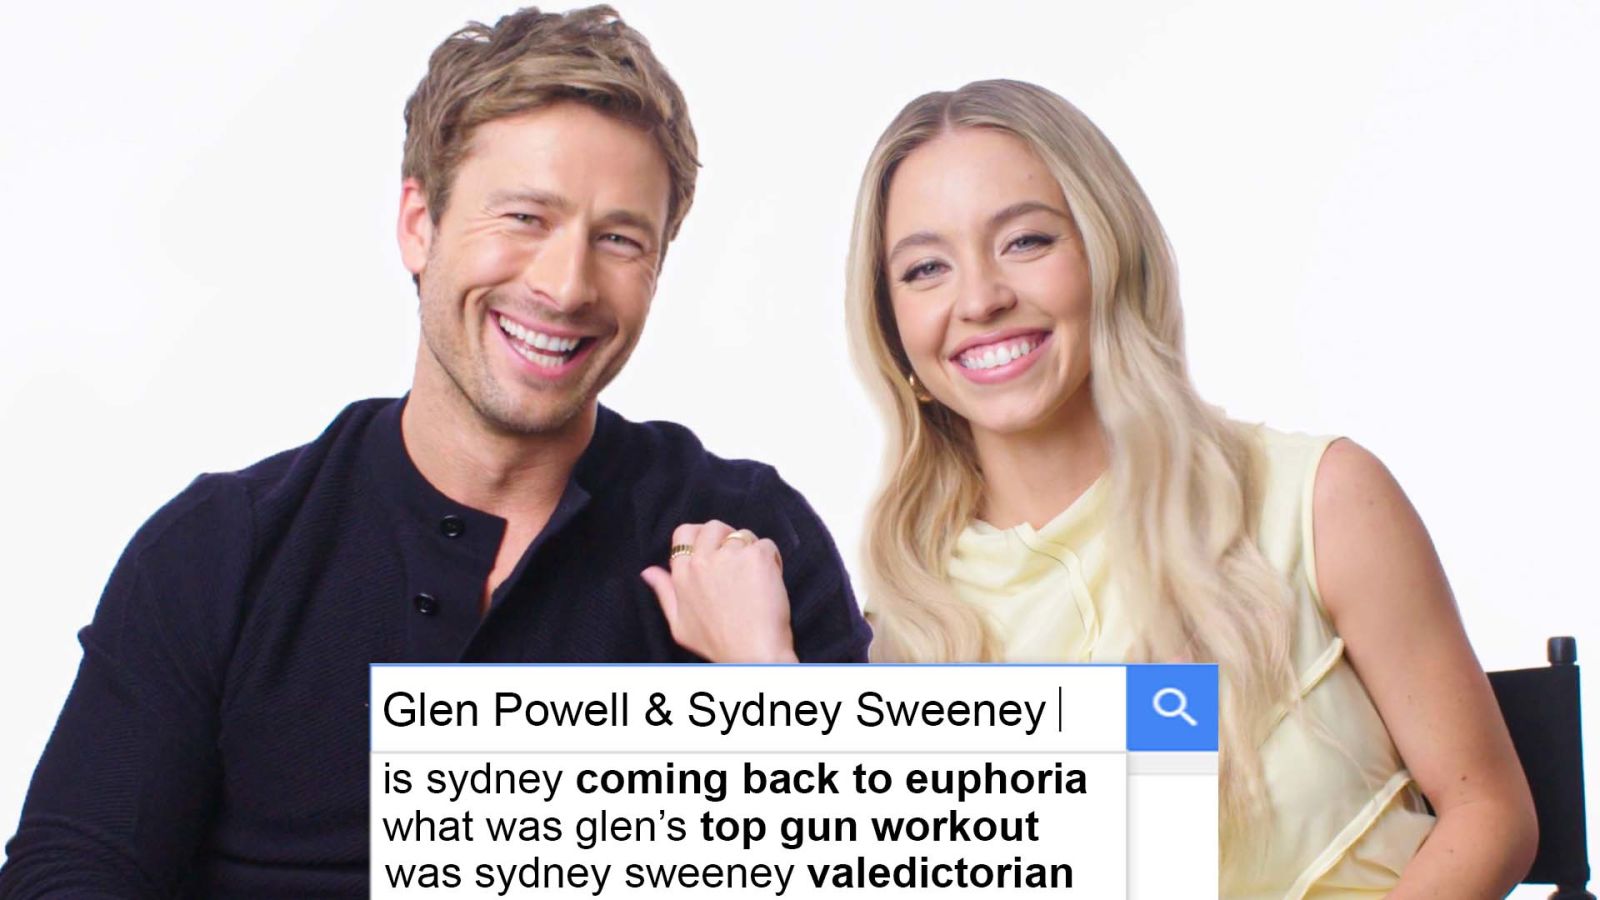 Sydney Sweeney and Glen Powell Answer The Web's Most Searched Questions